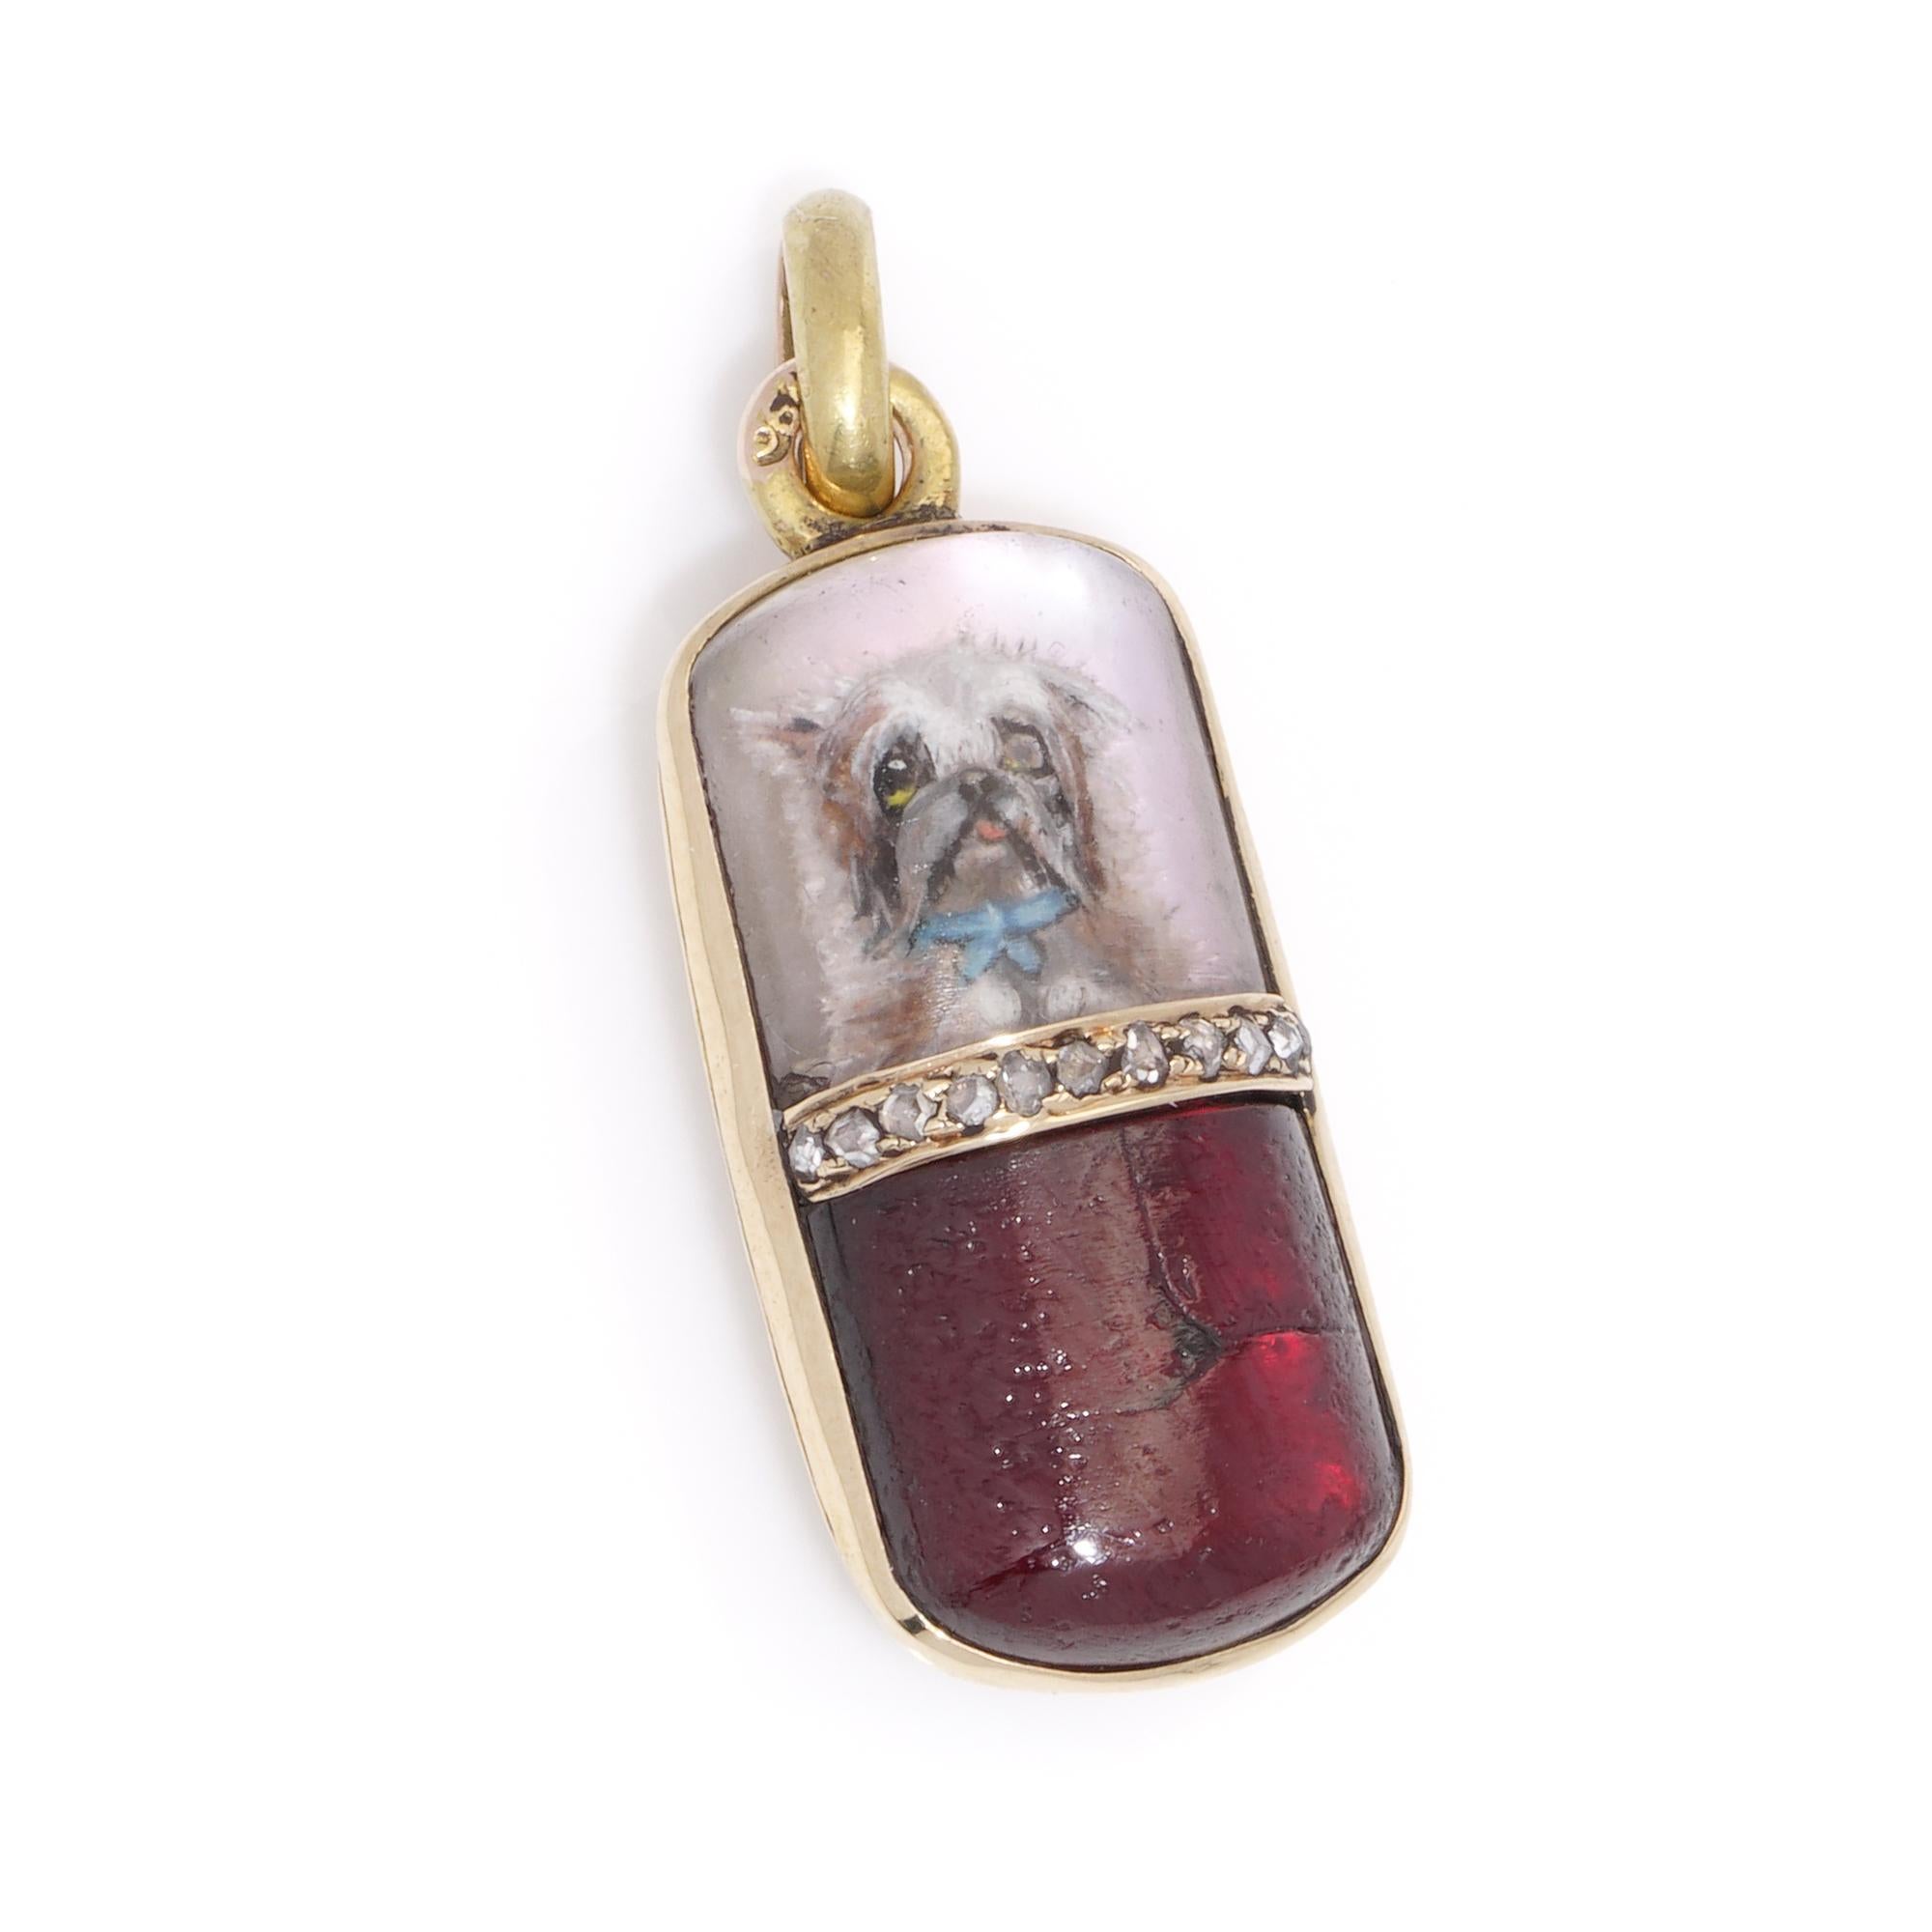 Antique Russian 21kt. yellow gold pendant with dog miniature and set with diamon For Sale 2